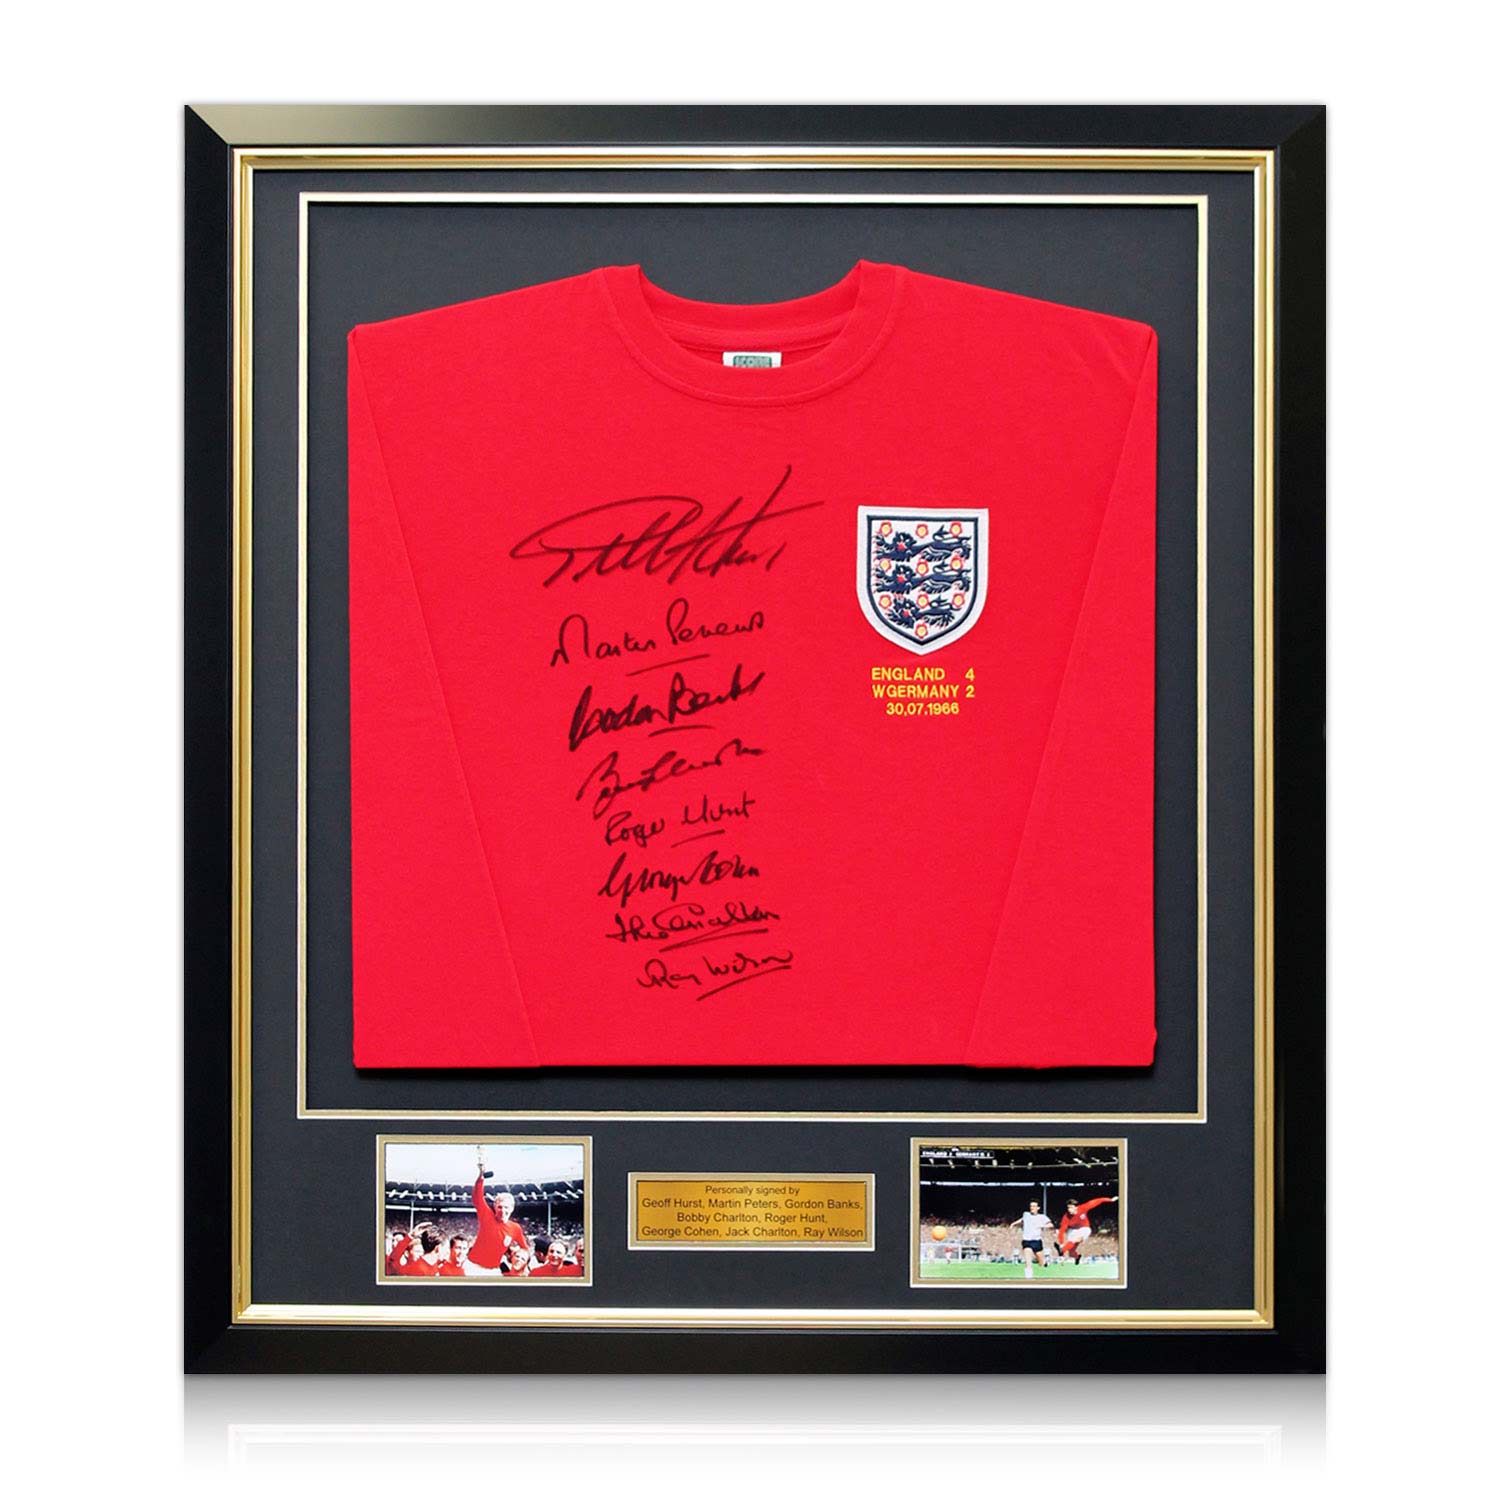 Geoff Hurst Signed England Football 12x16 Photograph In A Picture Mount